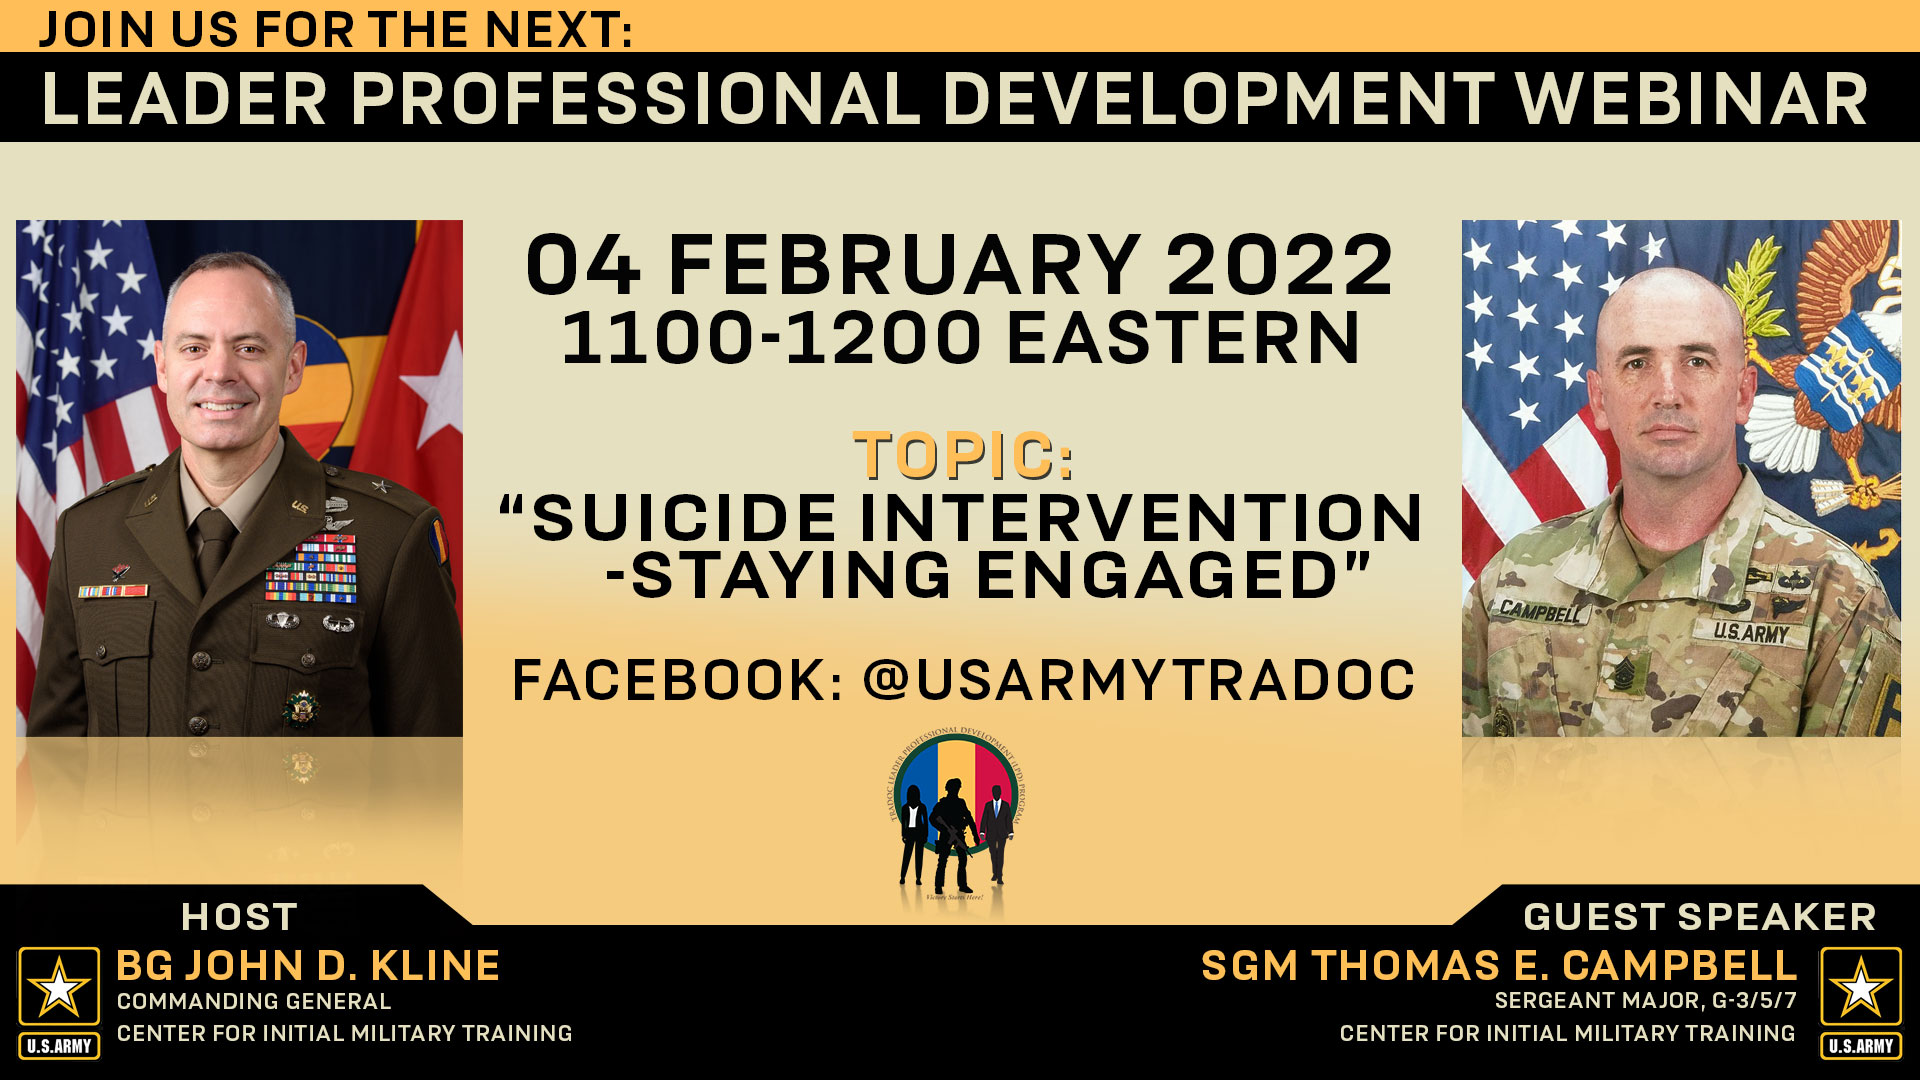 https://uat.tradoc.army.mil/wp-content/uploads/2022/01/FINAL-Join-Us-for-the-Next-SUICIDE-INTERVENTION-STAYING-ENGAGED.